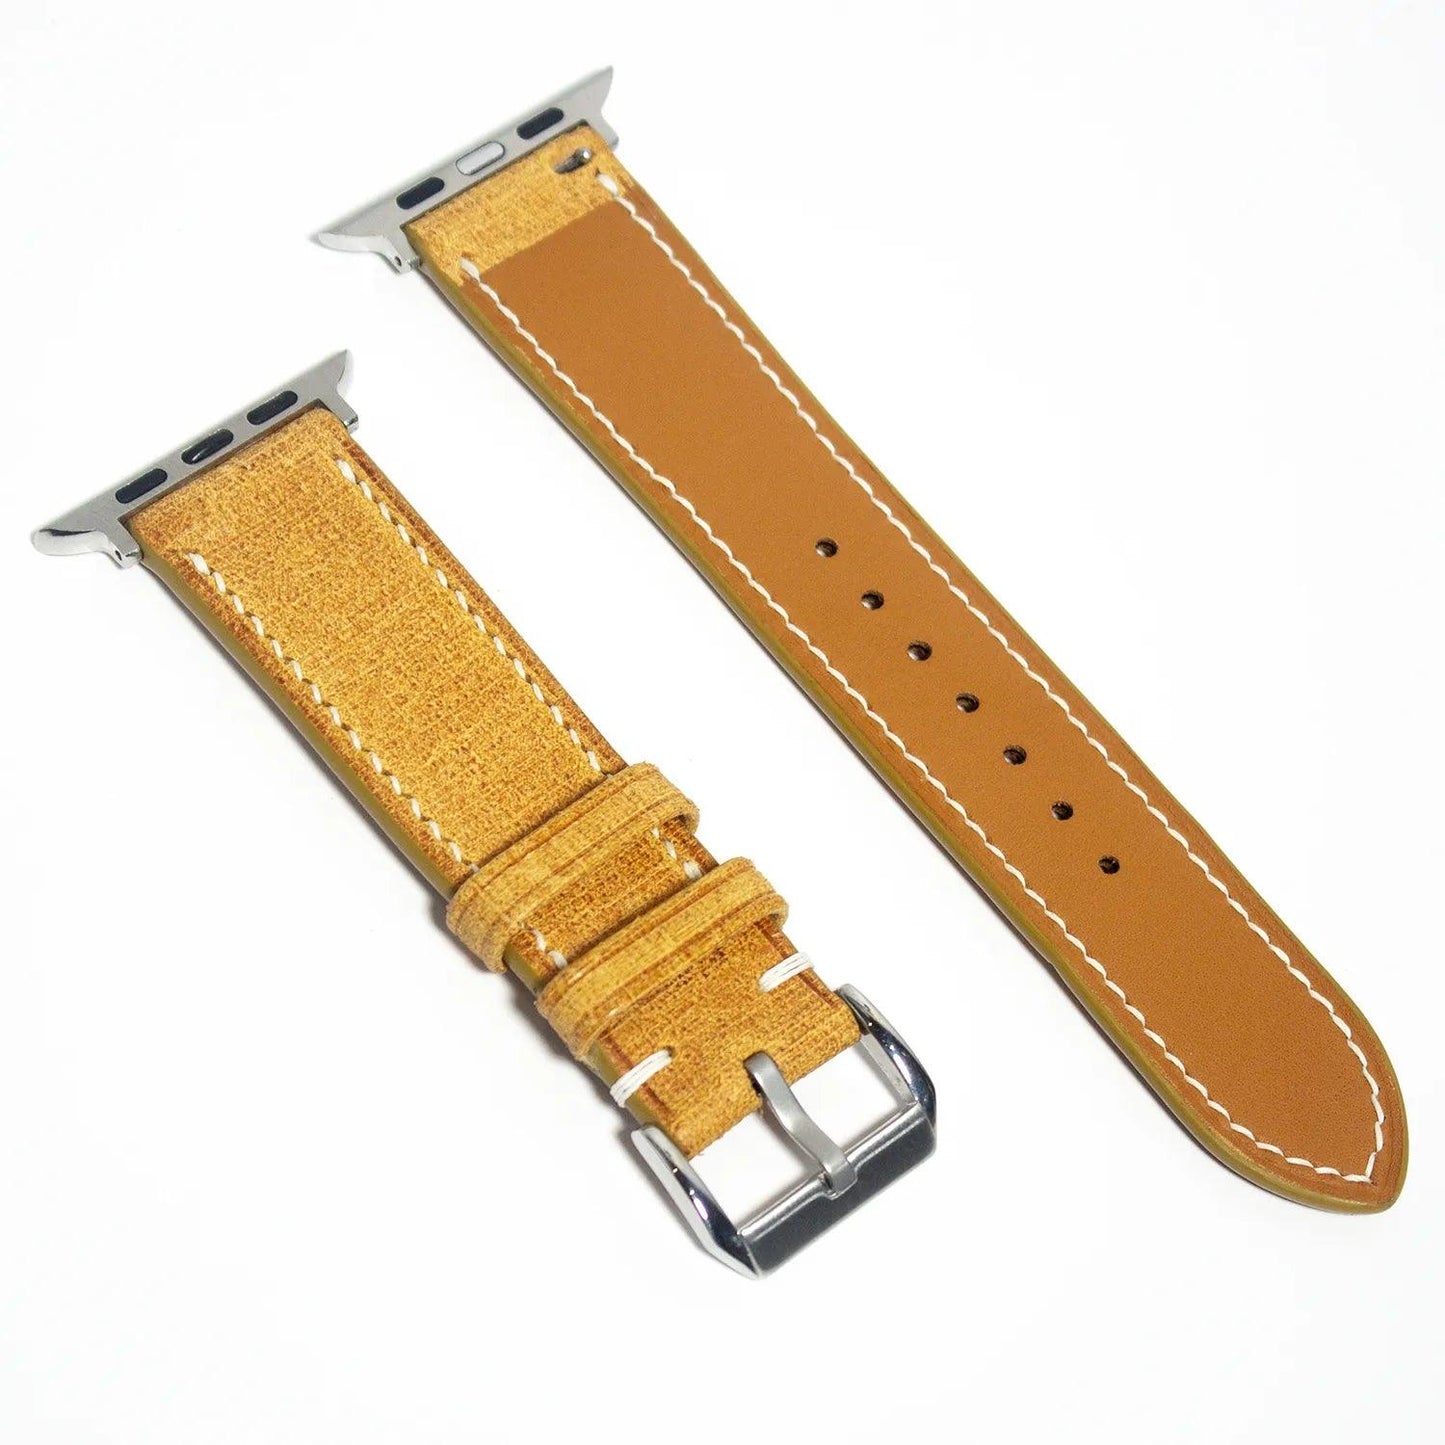 Stylish leather watch bands made from vibrant yellow Babele leather, ideal for fashion-forward individuals.